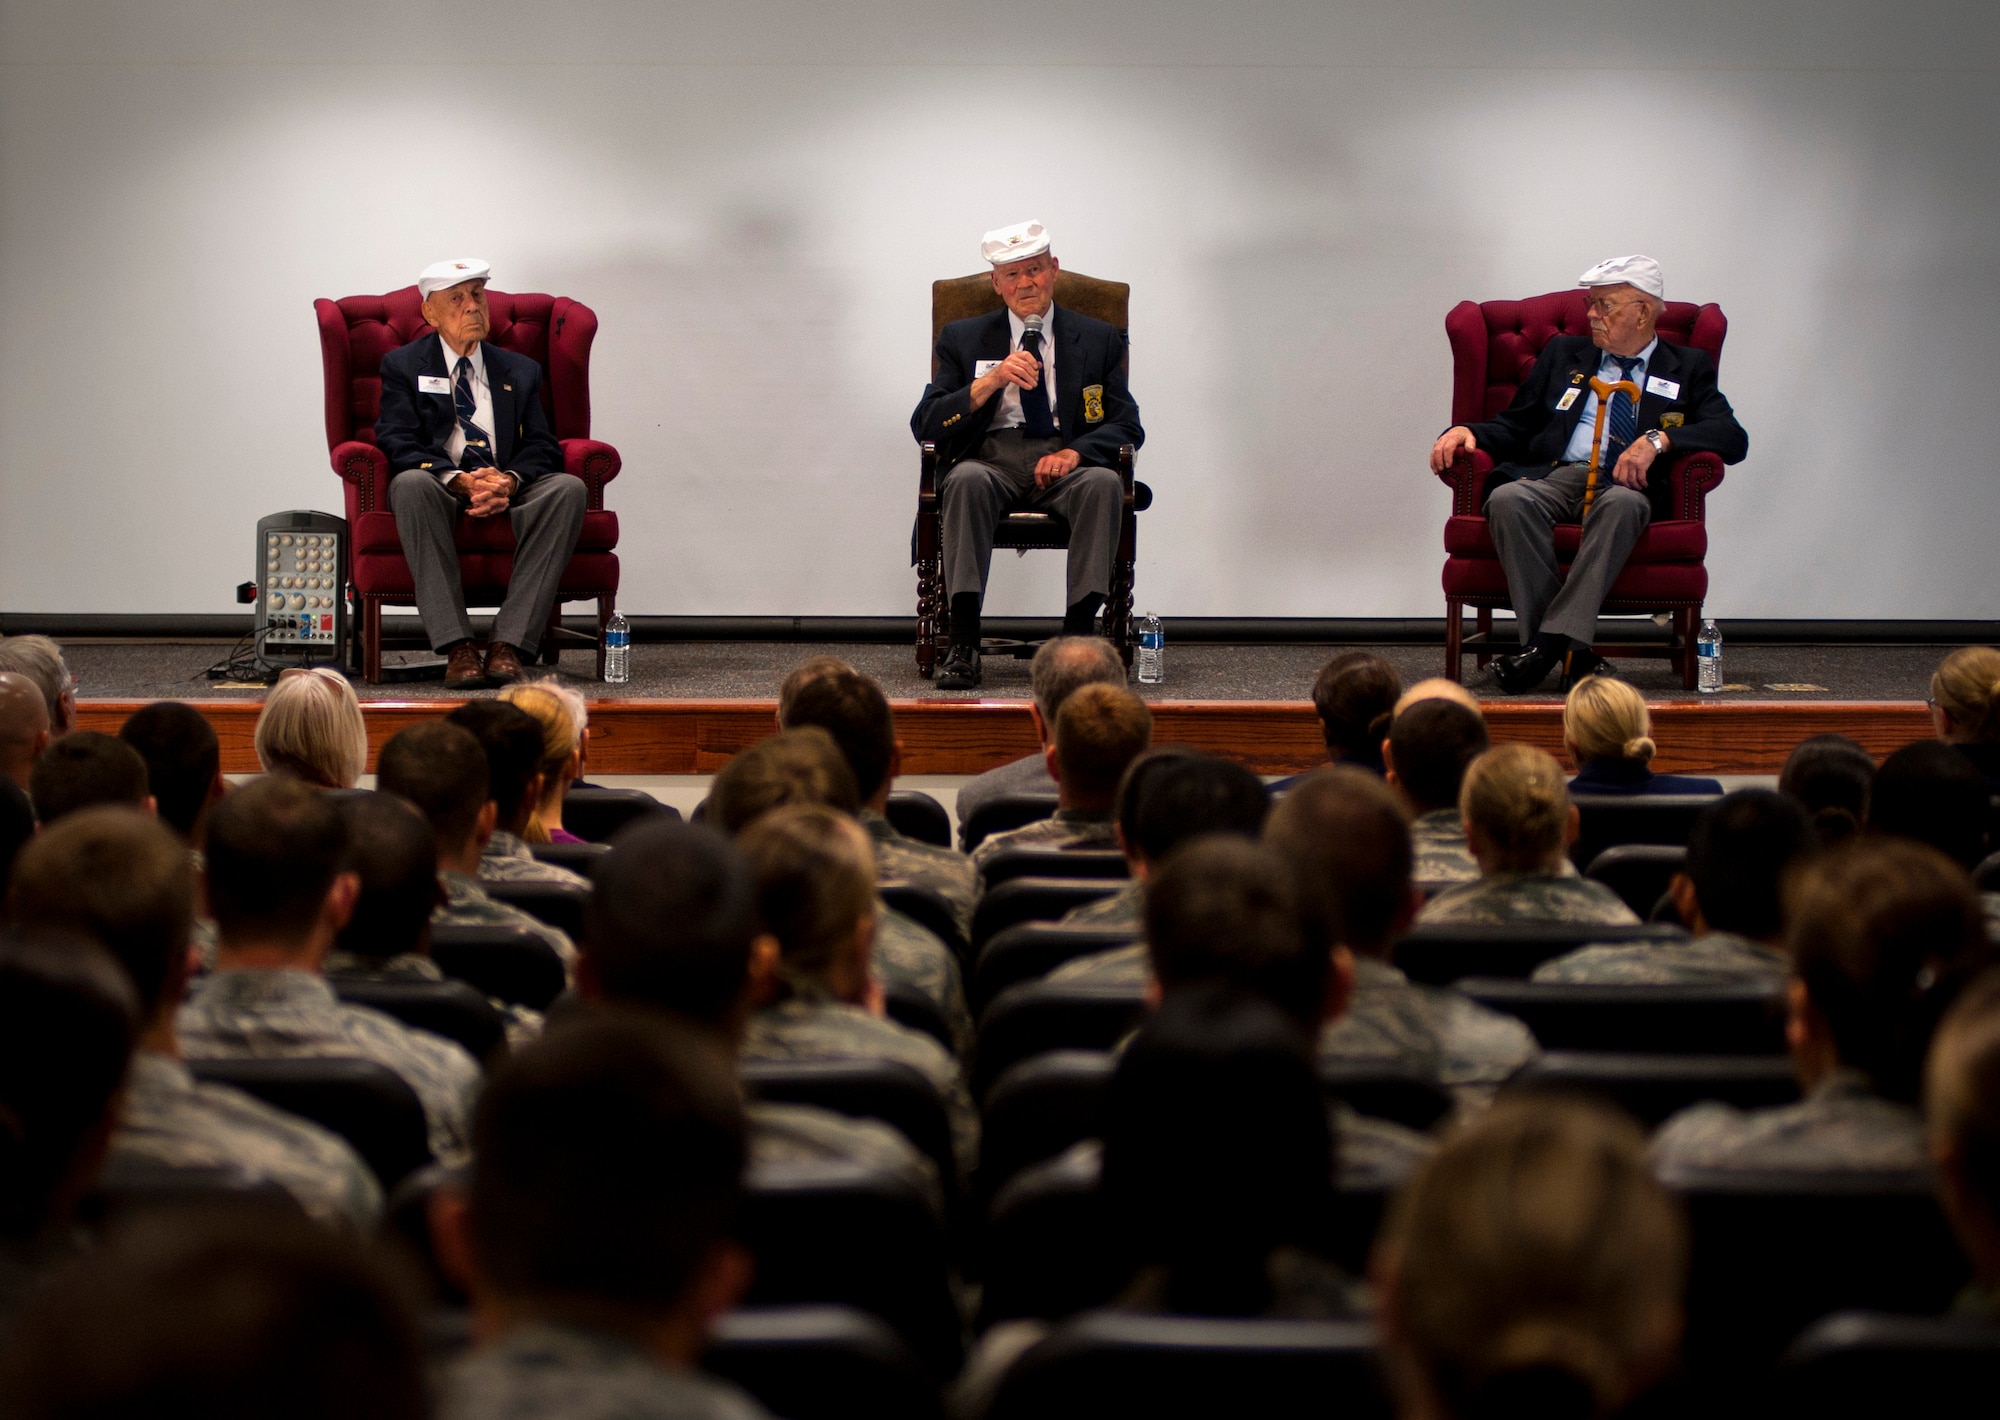 From left, retired Staff Sgt. David Thatcher, Retired Lt. Col. Dick Cole and retired Lt. Col. Ed Saylor, answer questions from Airmen at Hurlburt Field, Fla., April 18, 2013. The three men are part of the Doolittle Raiders, who bombed Tokyo 71 years ago today. (U.S. Air Force photo by Staff Sgt. David Salanitri)